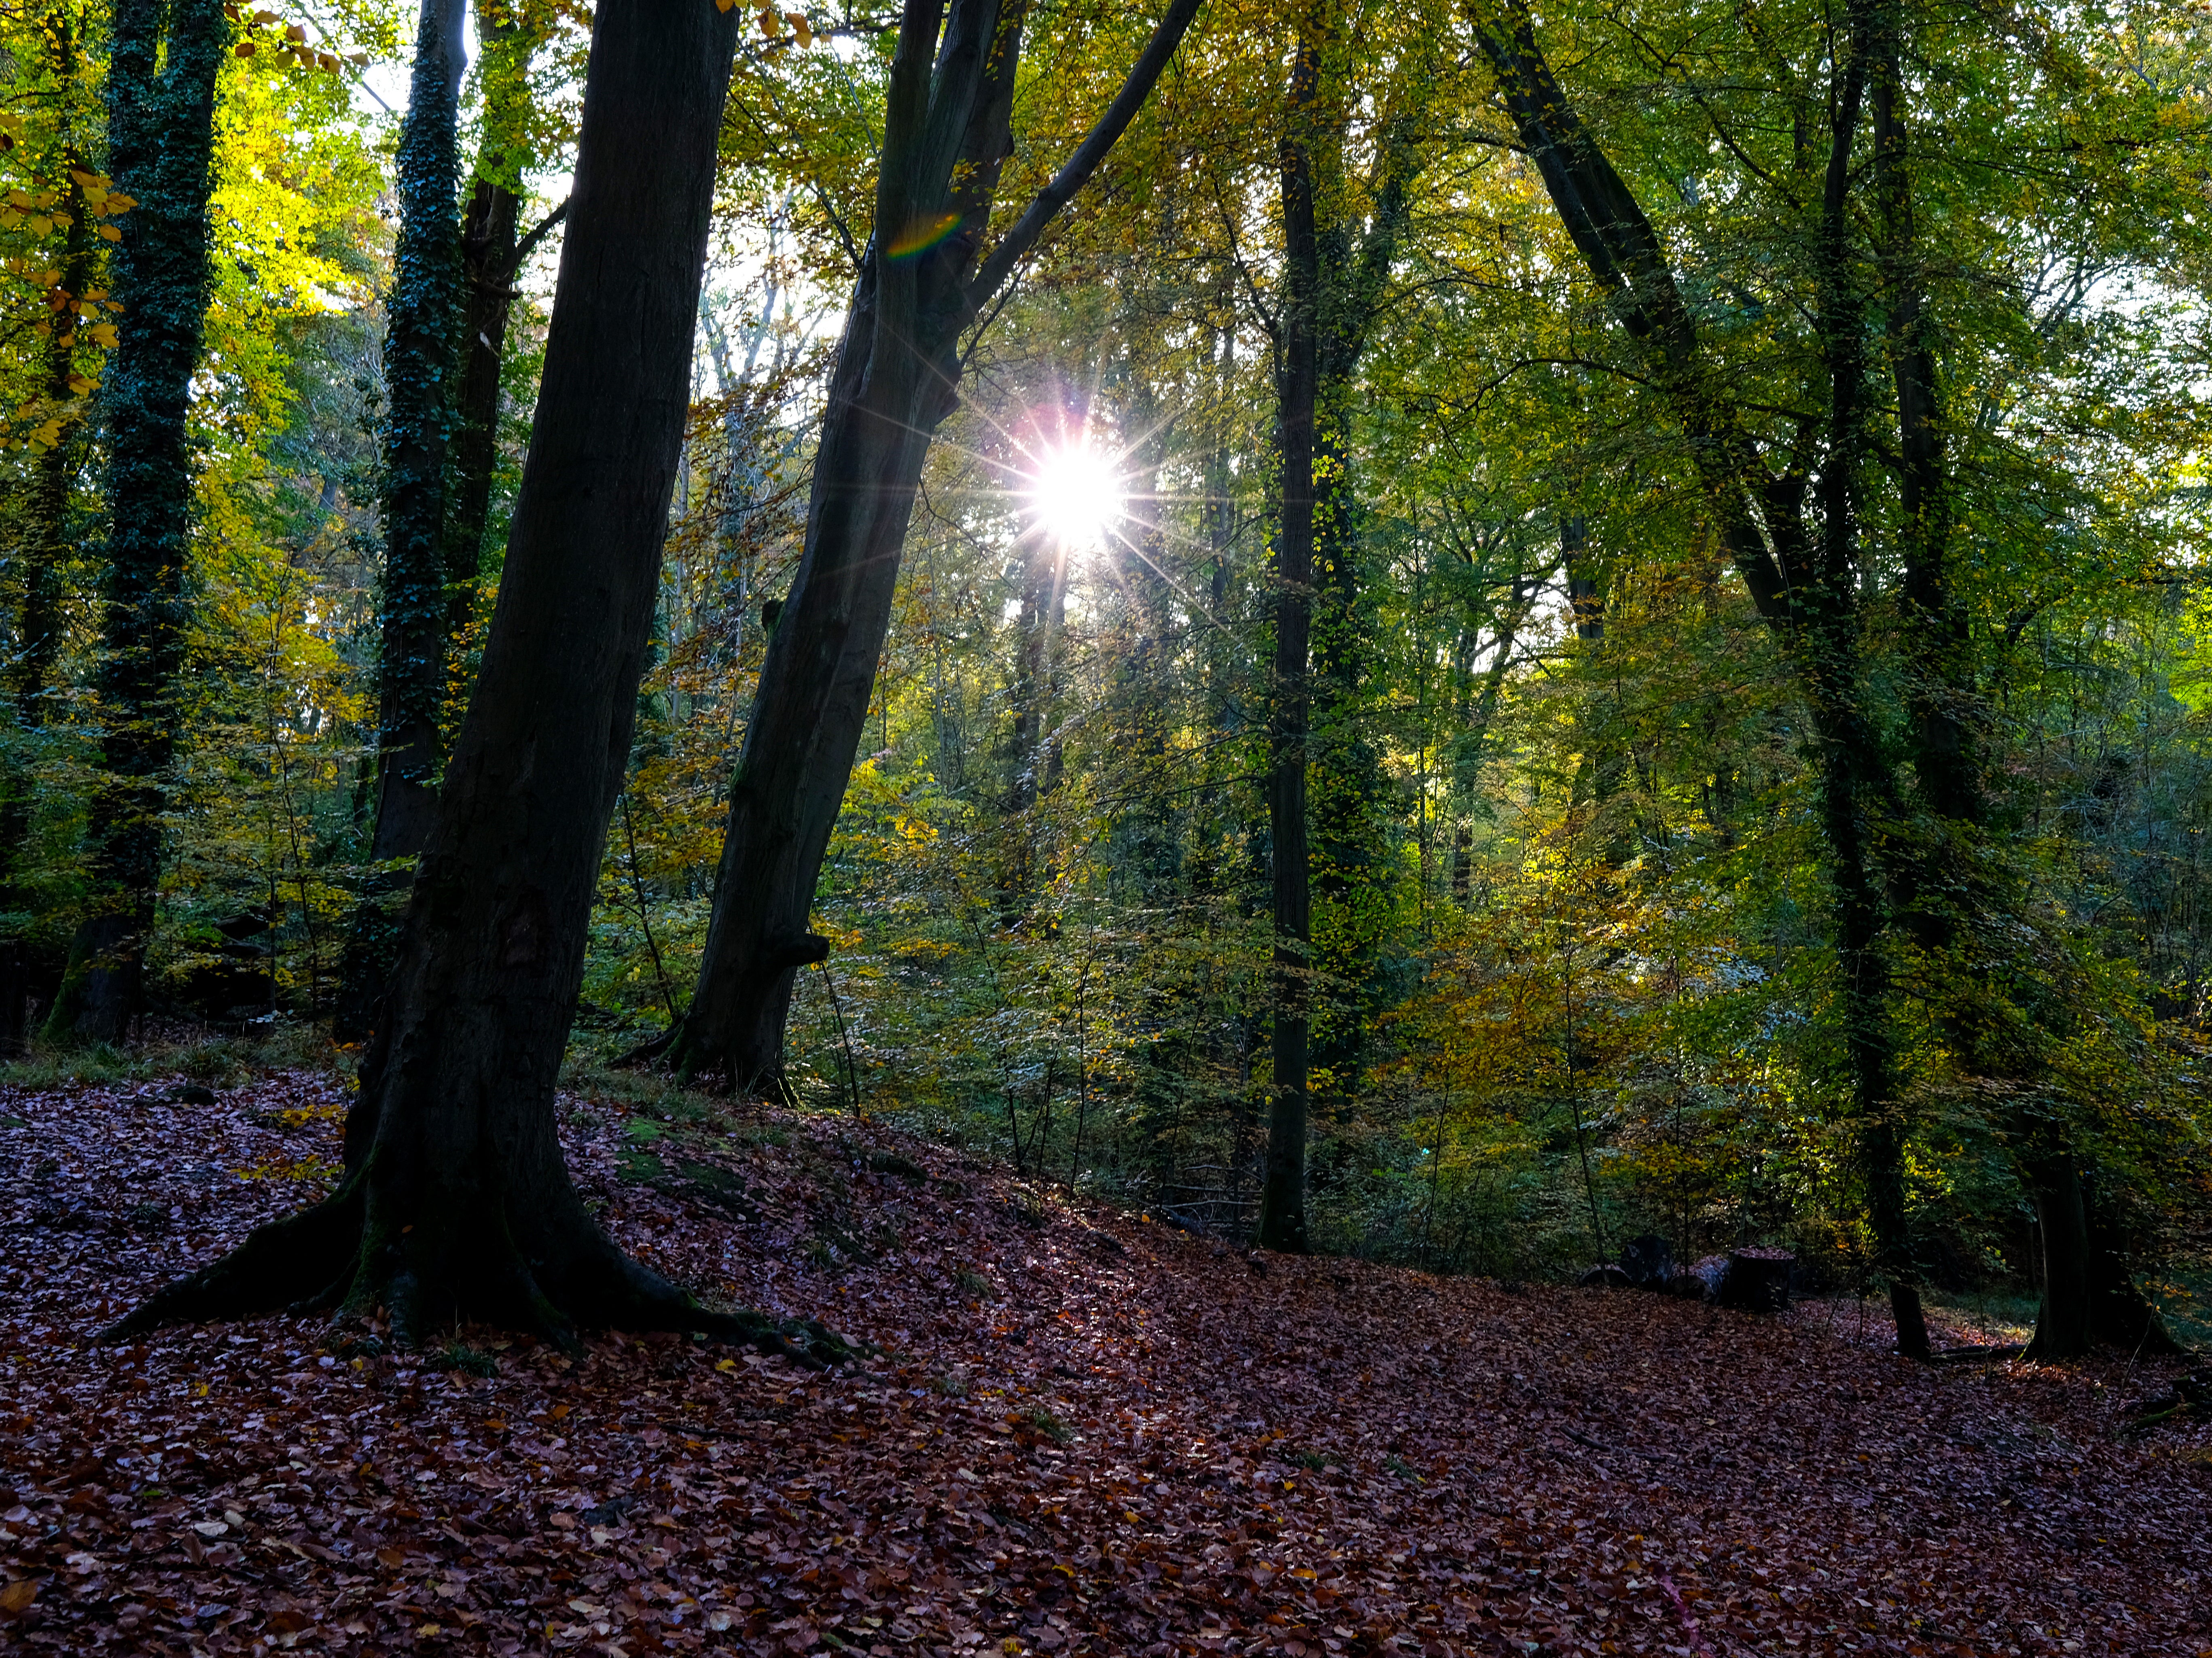 Woodland accounts for 13 per cent of Britain’s surface area, about half of which consists of oak, beech and ash